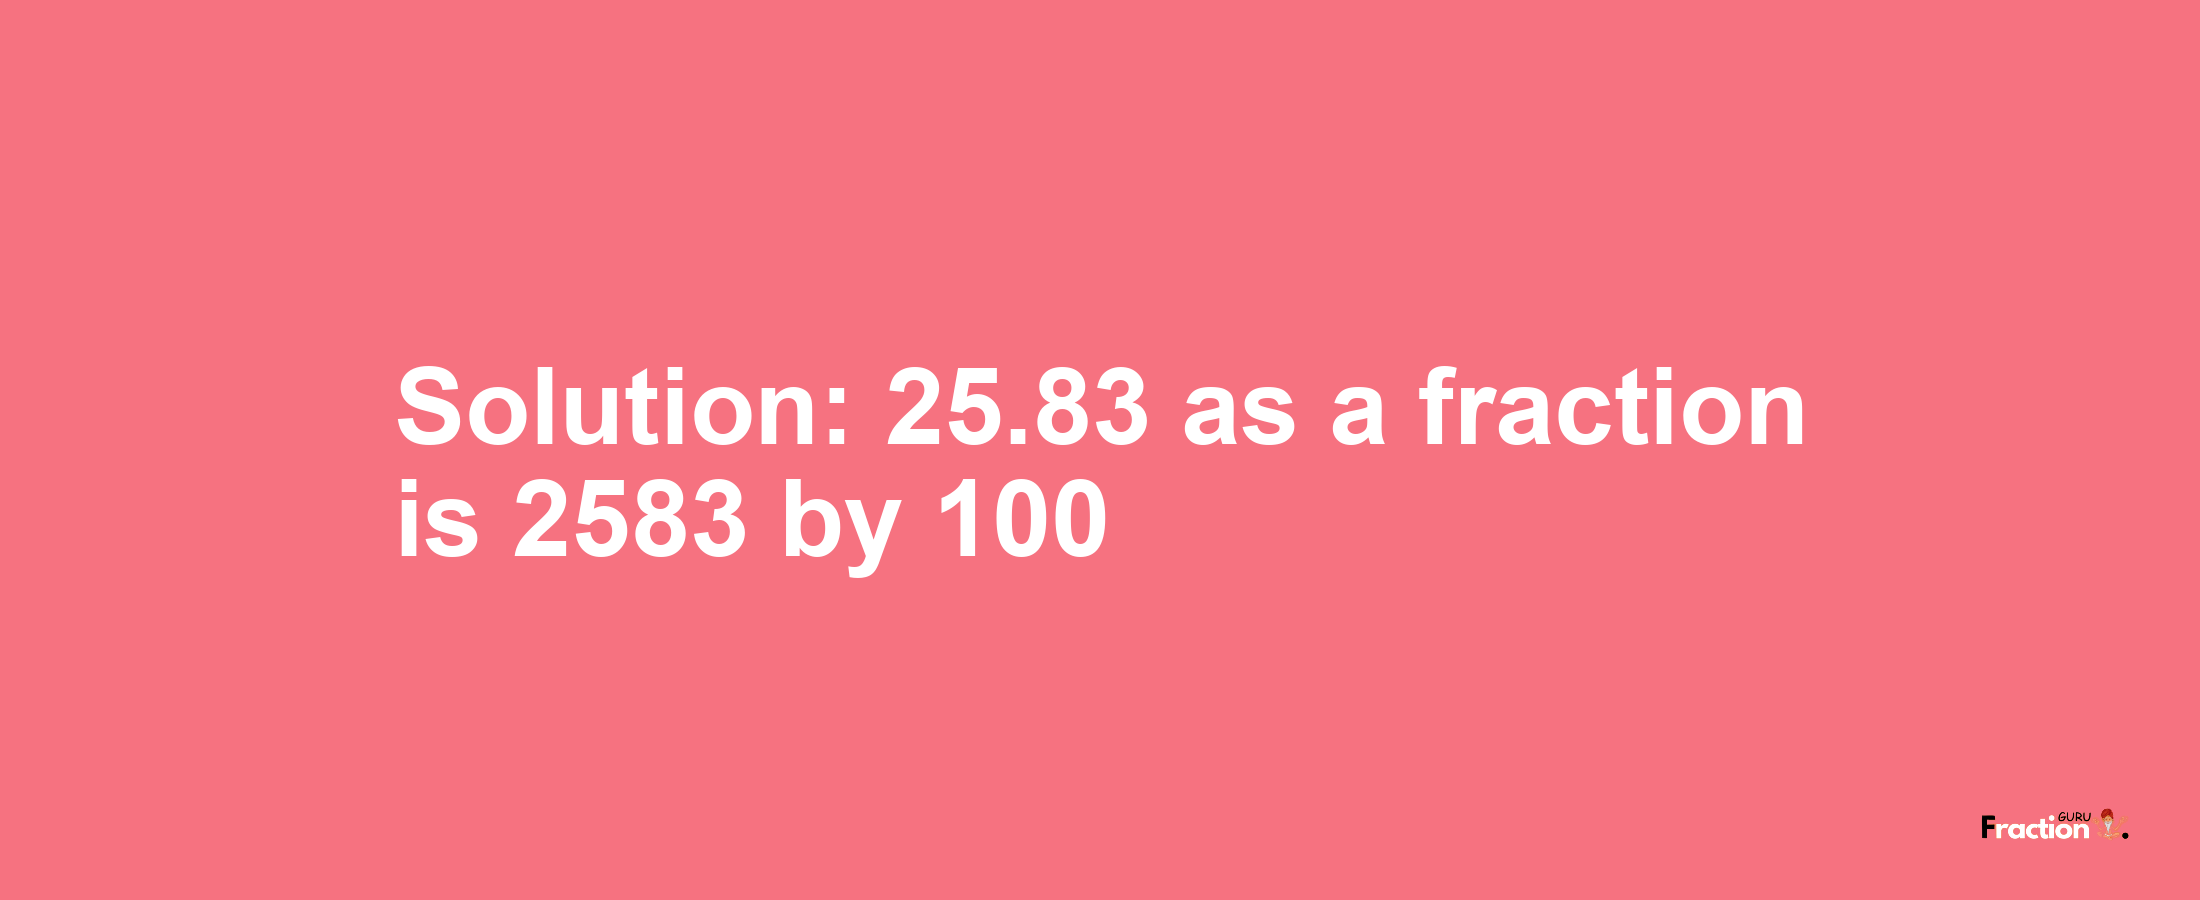 Solution:25.83 as a fraction is 2583/100